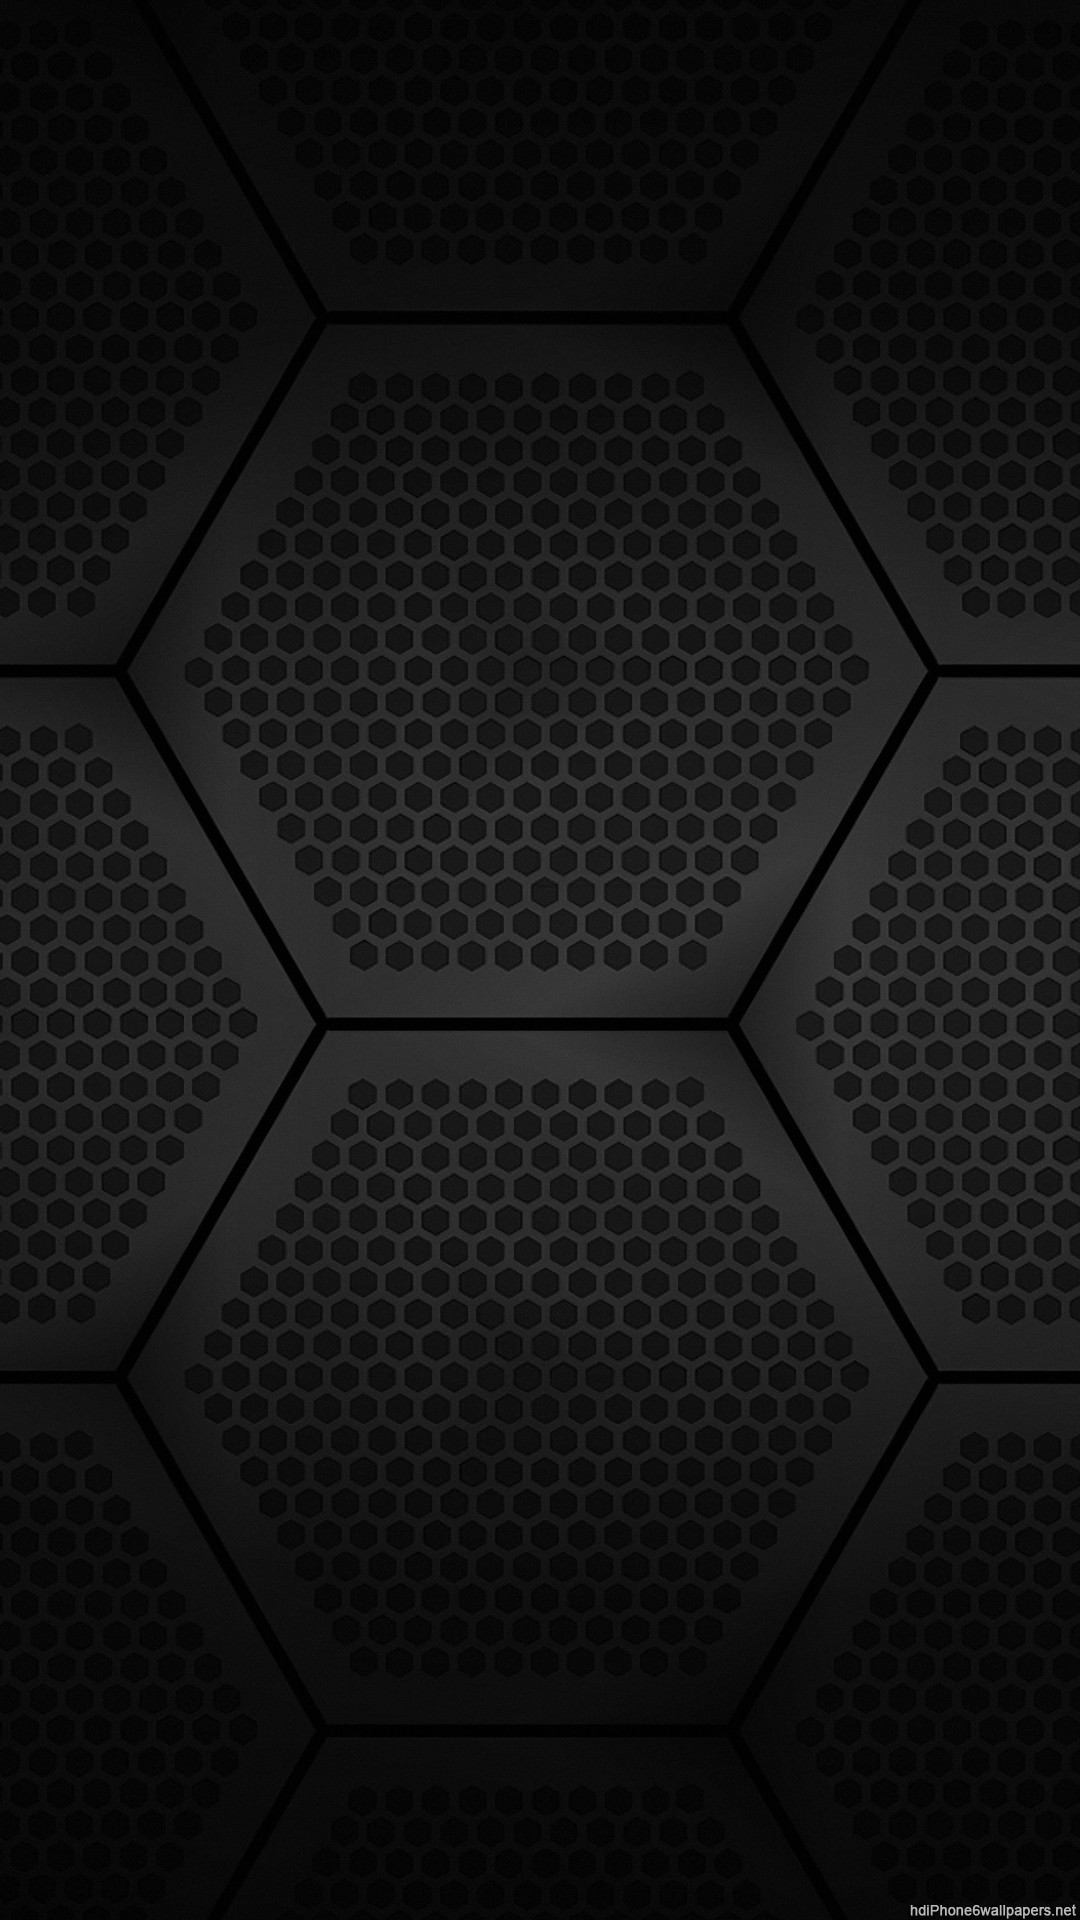 1080x1920  Hexagons iPhone 6 wallpapers HD - 6 Plus backgrounds